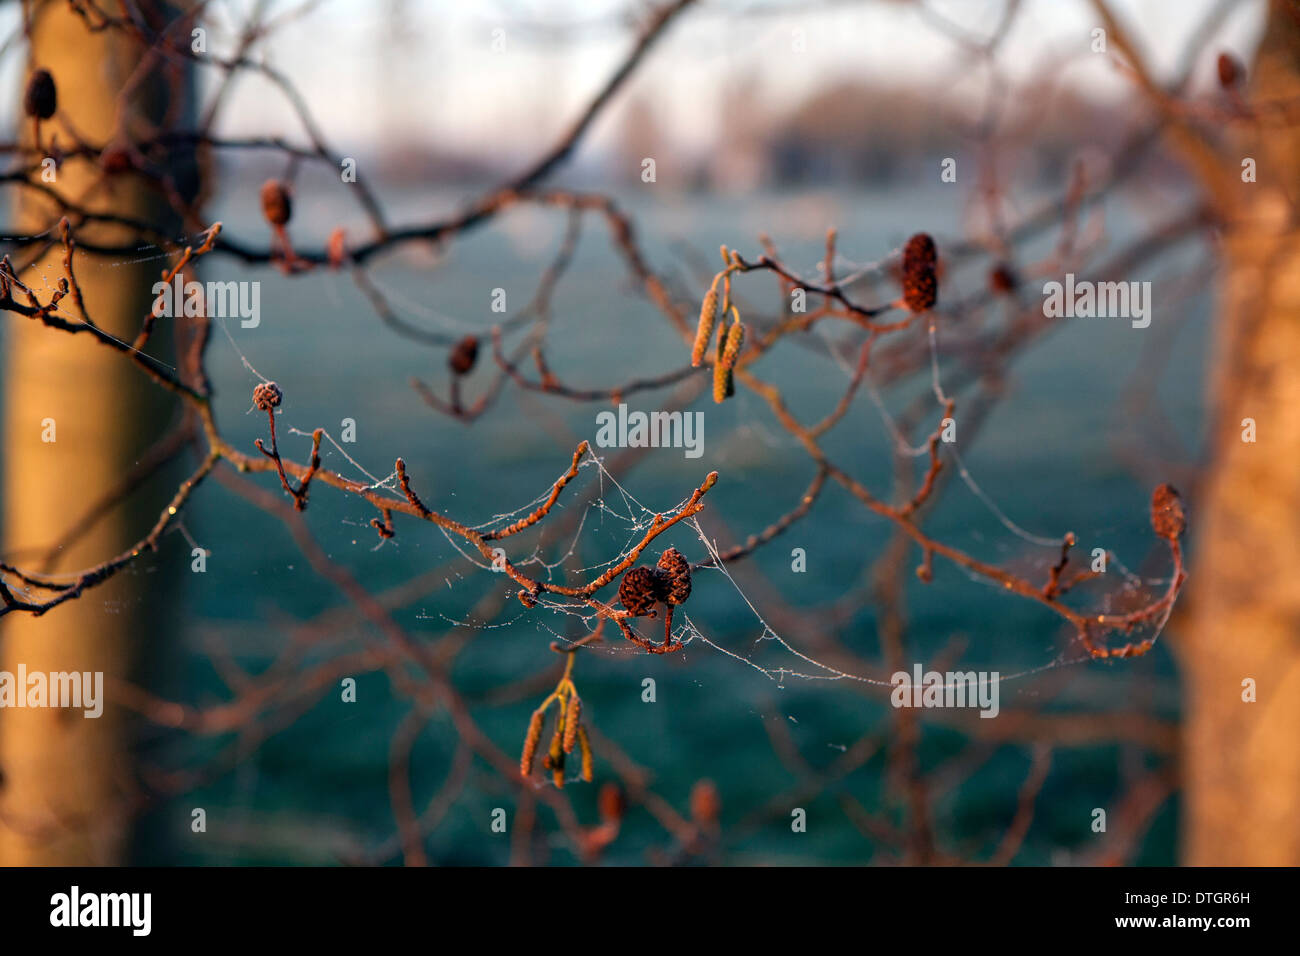 Frosty cobwebs on tree branches bathed in morning sunlight. Stock Photo